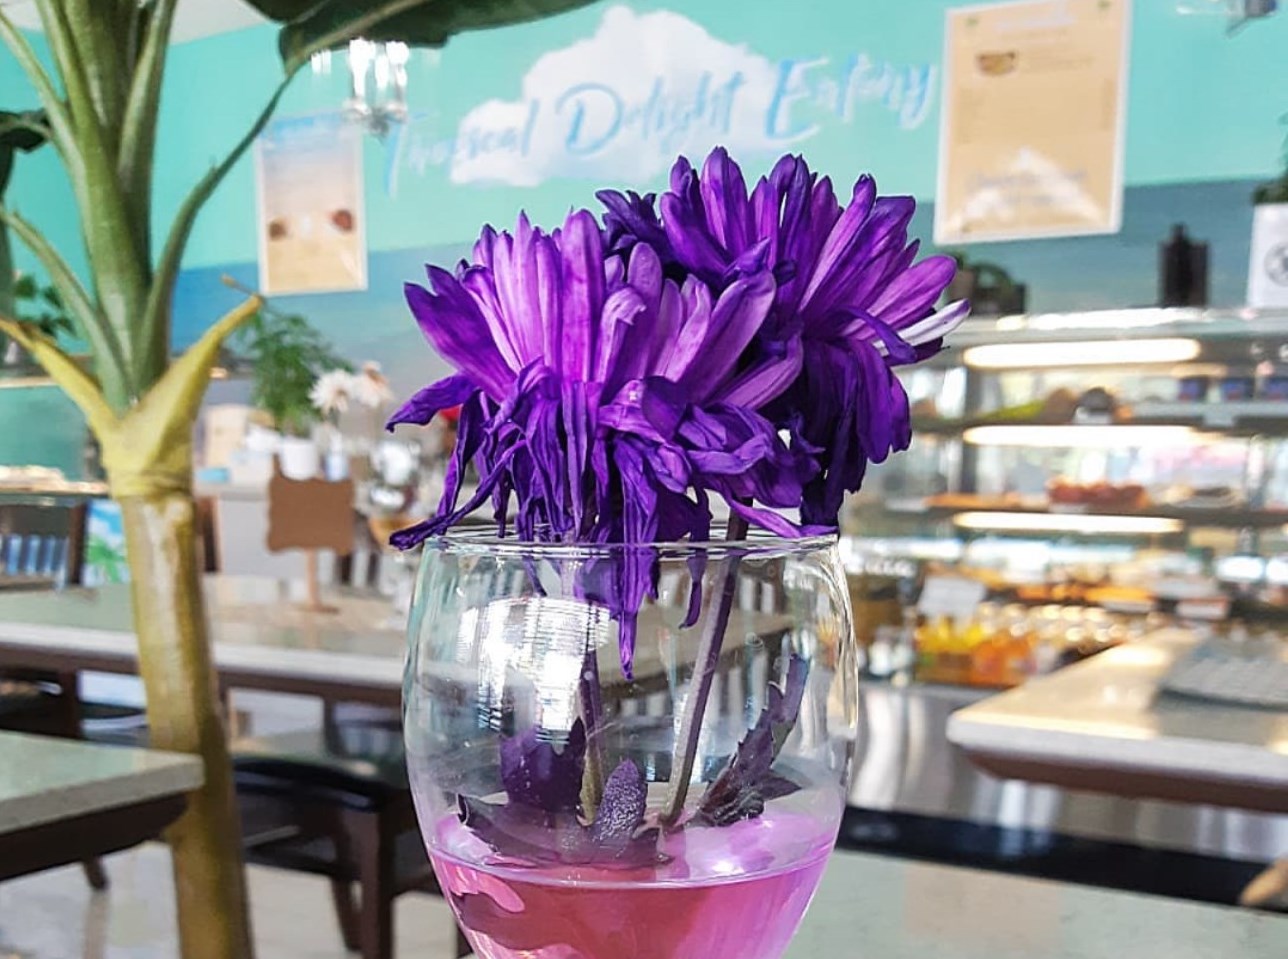 Colourful drink with a flower on it from Tropical Delight Eatery in Ajax, Ontario